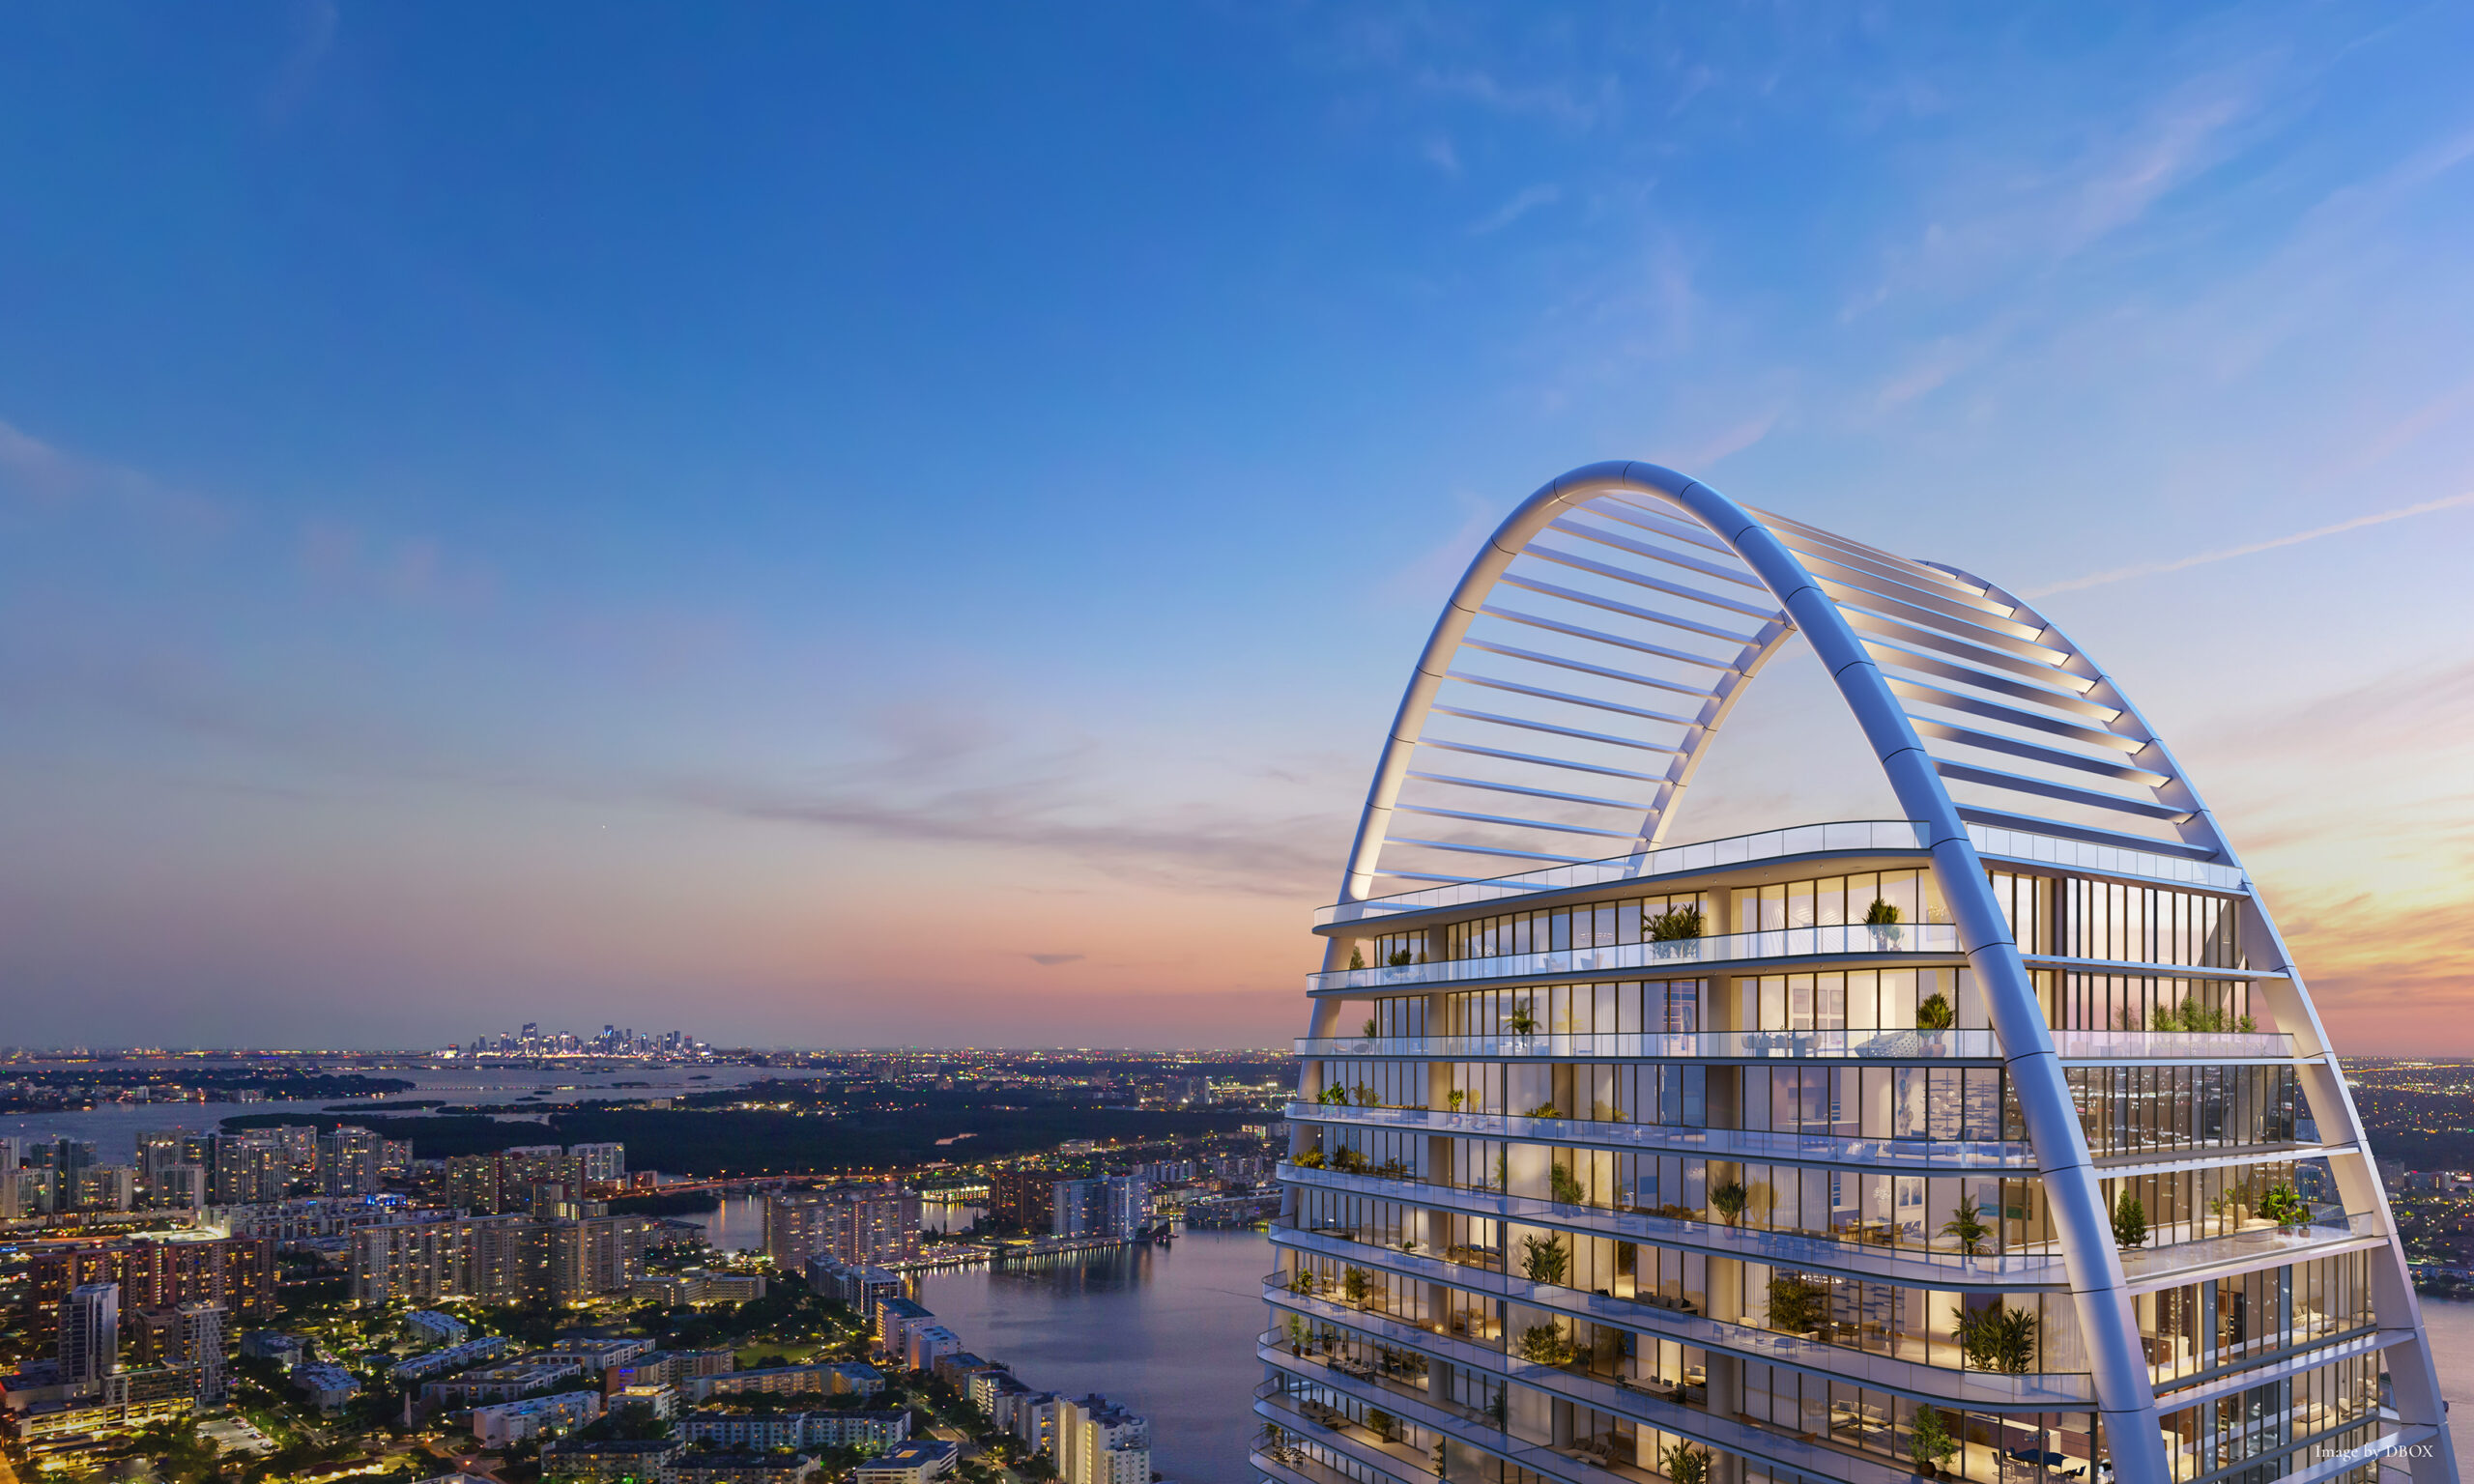 Construction Commences at the 750-Foot St. Regis Sunny Isles Beach